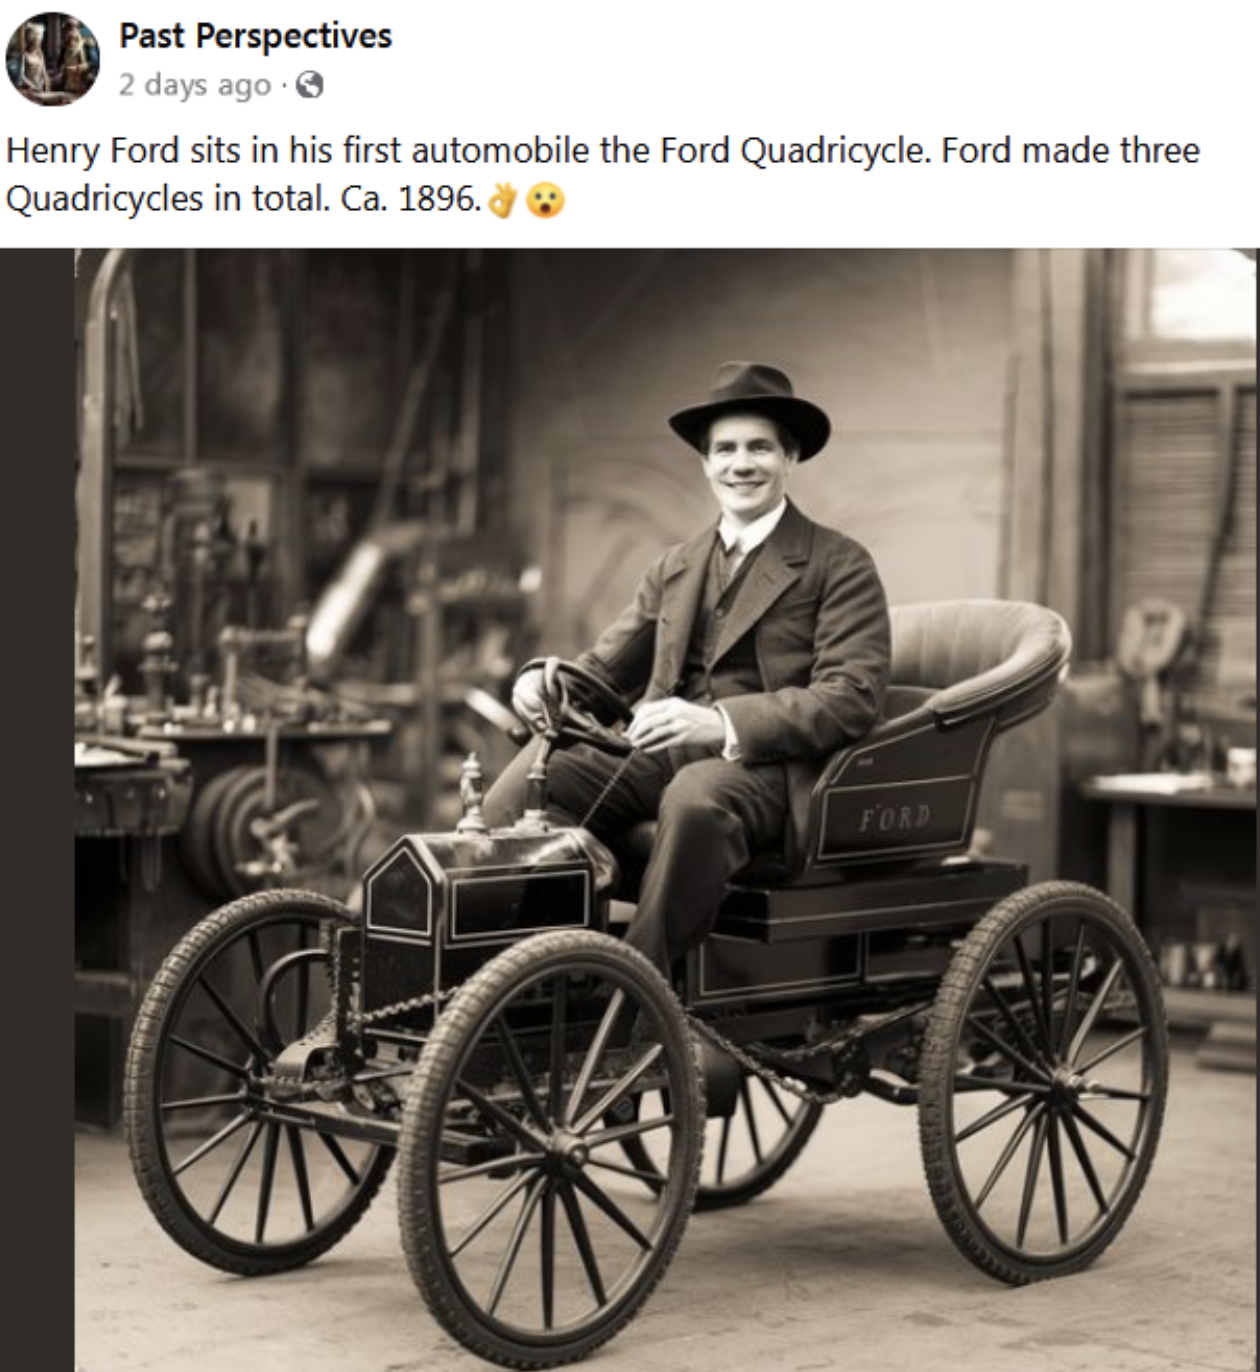 chaise - Past Perspectives 2 days ago. Henry Ford sits in his first automobile the Ford Quadricycle. Ford made three Quadricycles in total. Ca. 1896. Fold